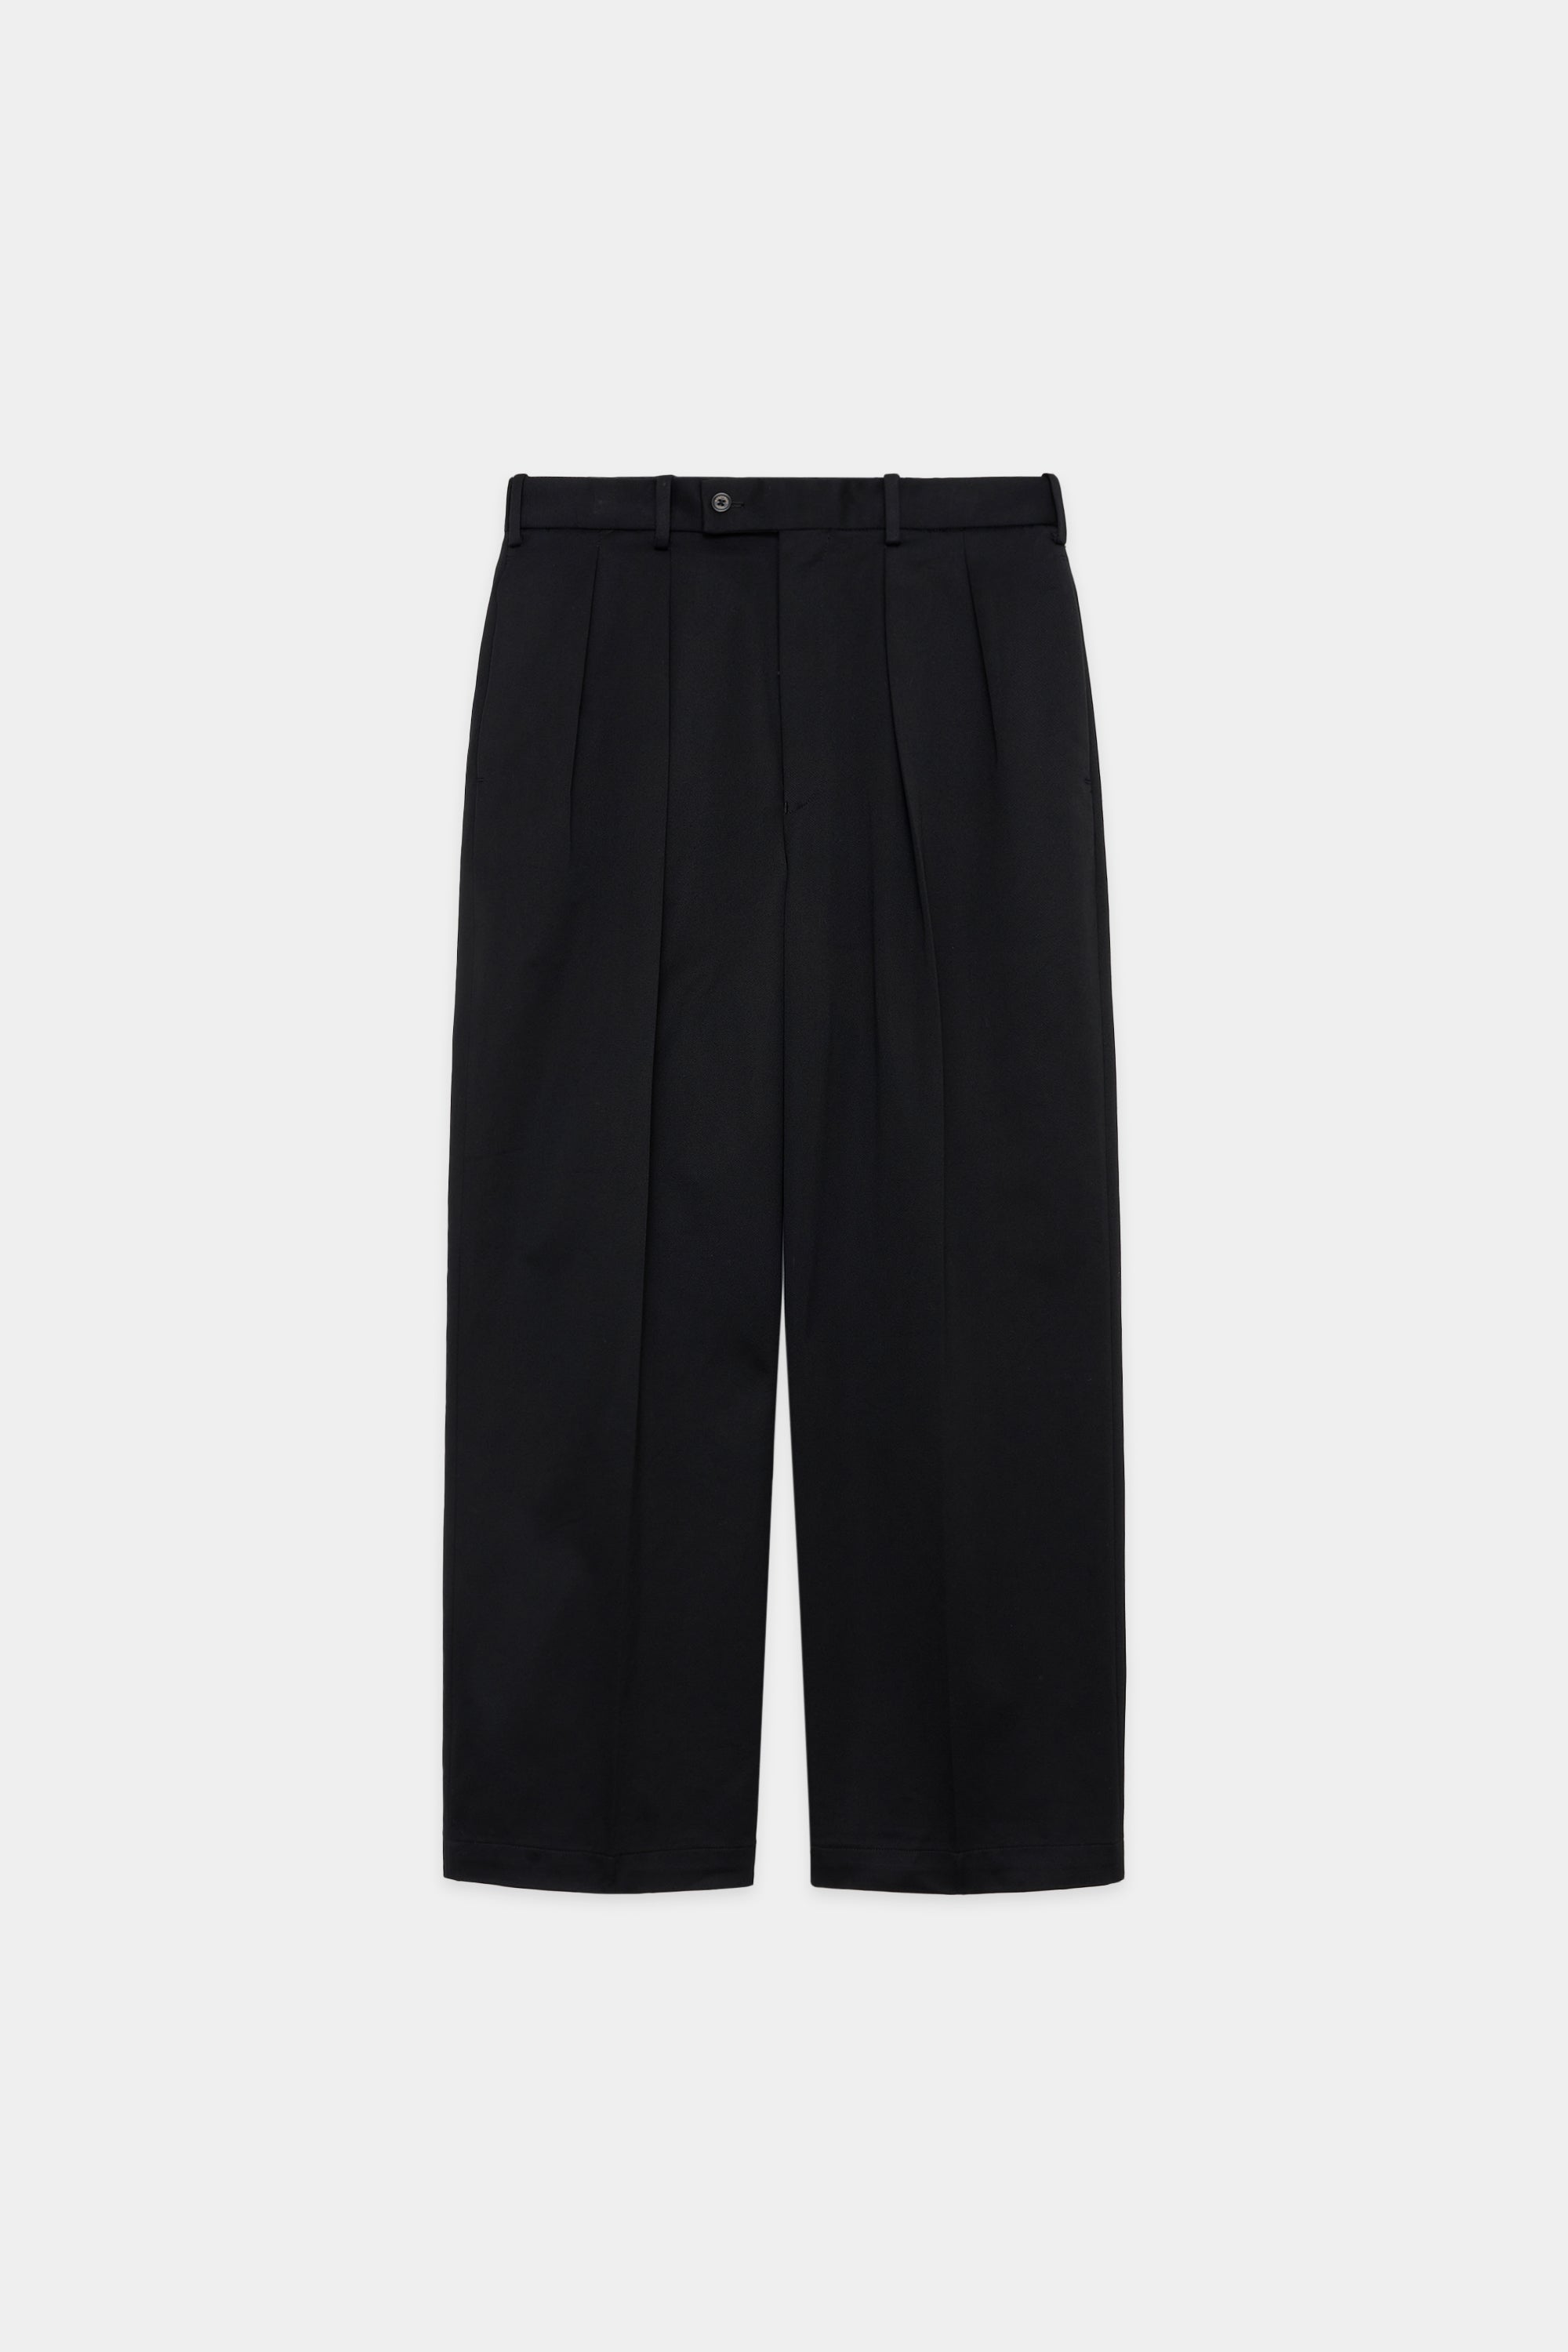 ORGANIC COTTON 30/2 TWILL DOUBLE PLEATED TROUSERS, Black